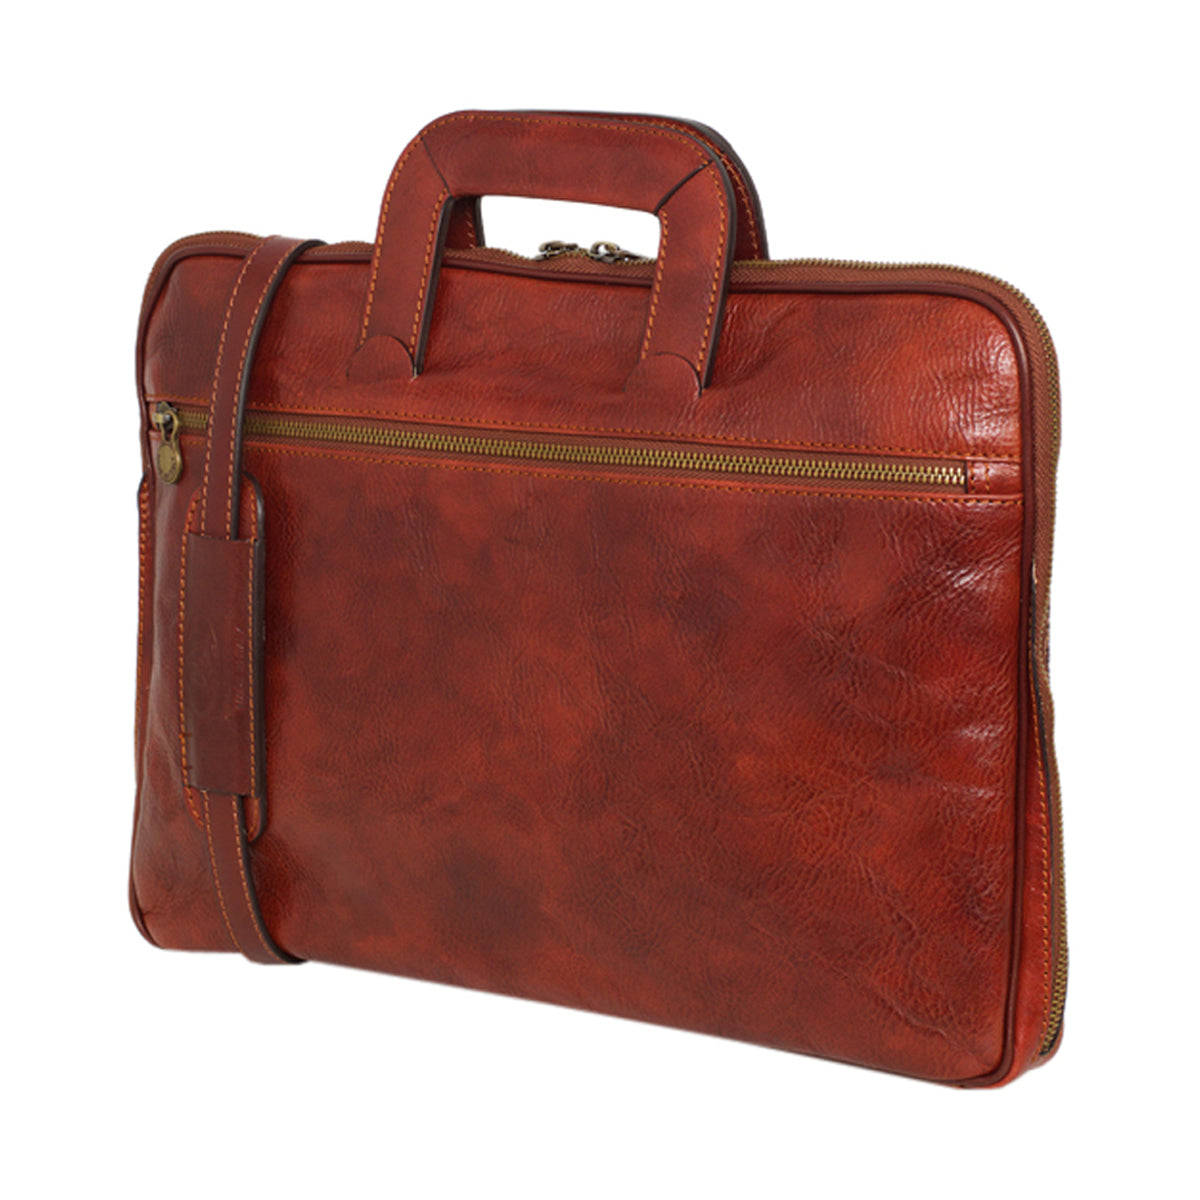 Republic of Florence - Slim Briefcase - Valencia Brown - Leather ...